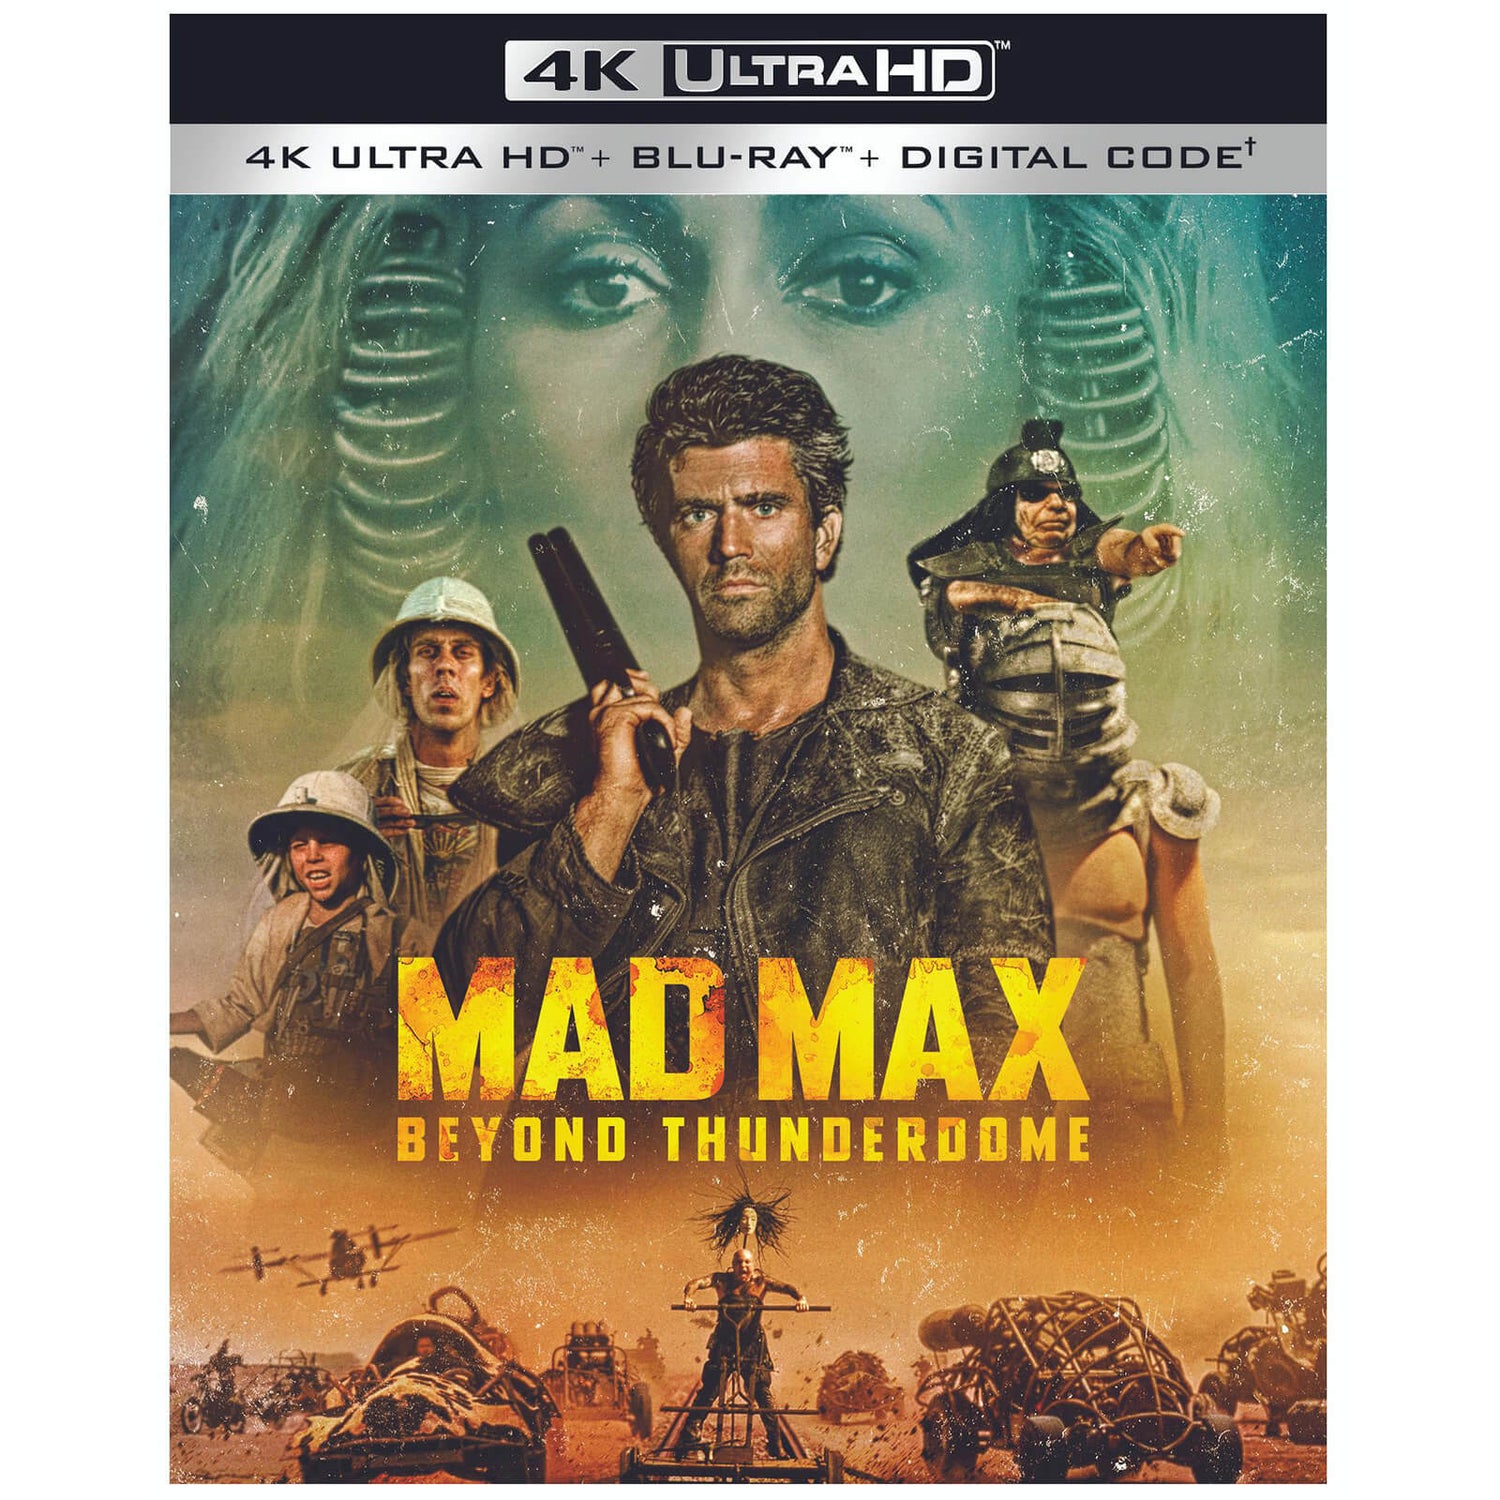 Mad Max Beyond Thunderdome - 4K Ultra HD (Includes Blu-ray)